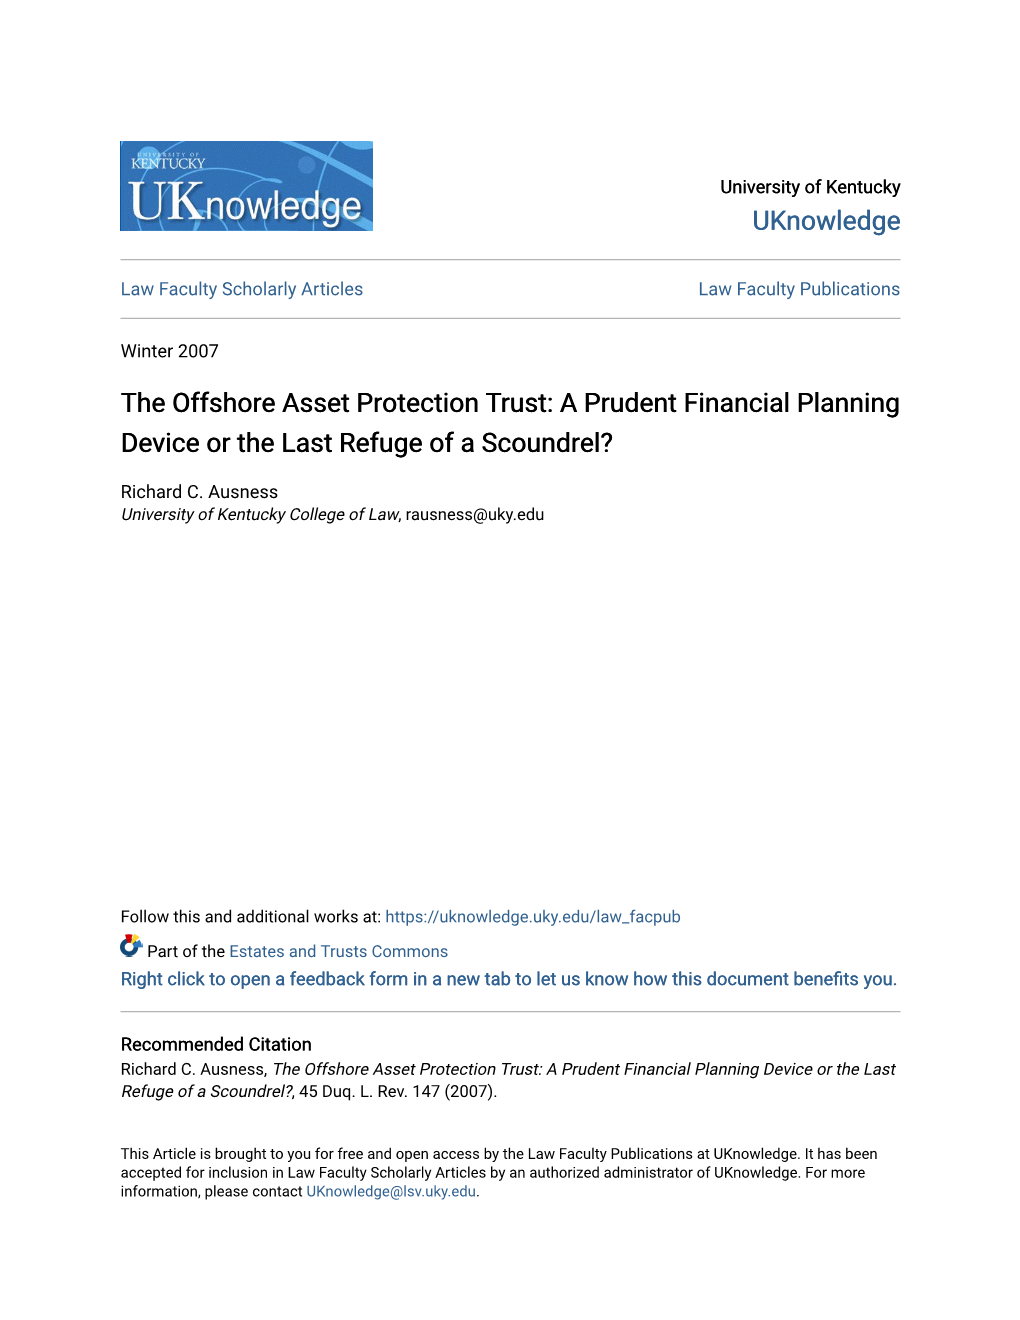 The Offshore Asset Protection Trust: a Prudent Financial Planning Device Or the Last Refuge of a Scoundrel?